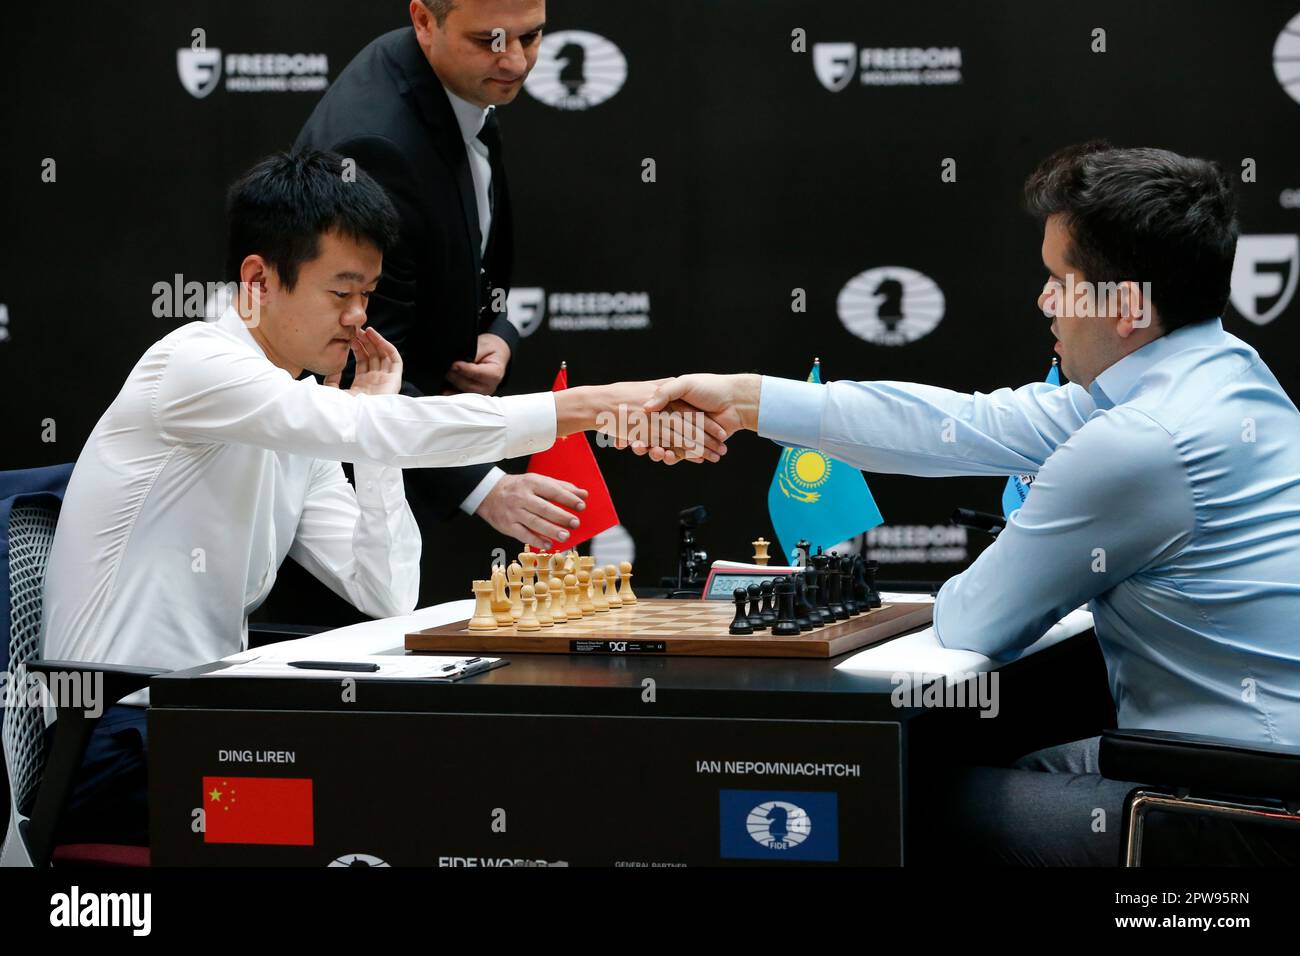 Russia's Ian Nepomniachtchi plays against China's Ding Liren during their  FIDE World Chess Championship in Astana, Kazakhstan, Saturday, April 29,  2023. Ian Nepomniachtchi and Ding Liren are facing off in the final